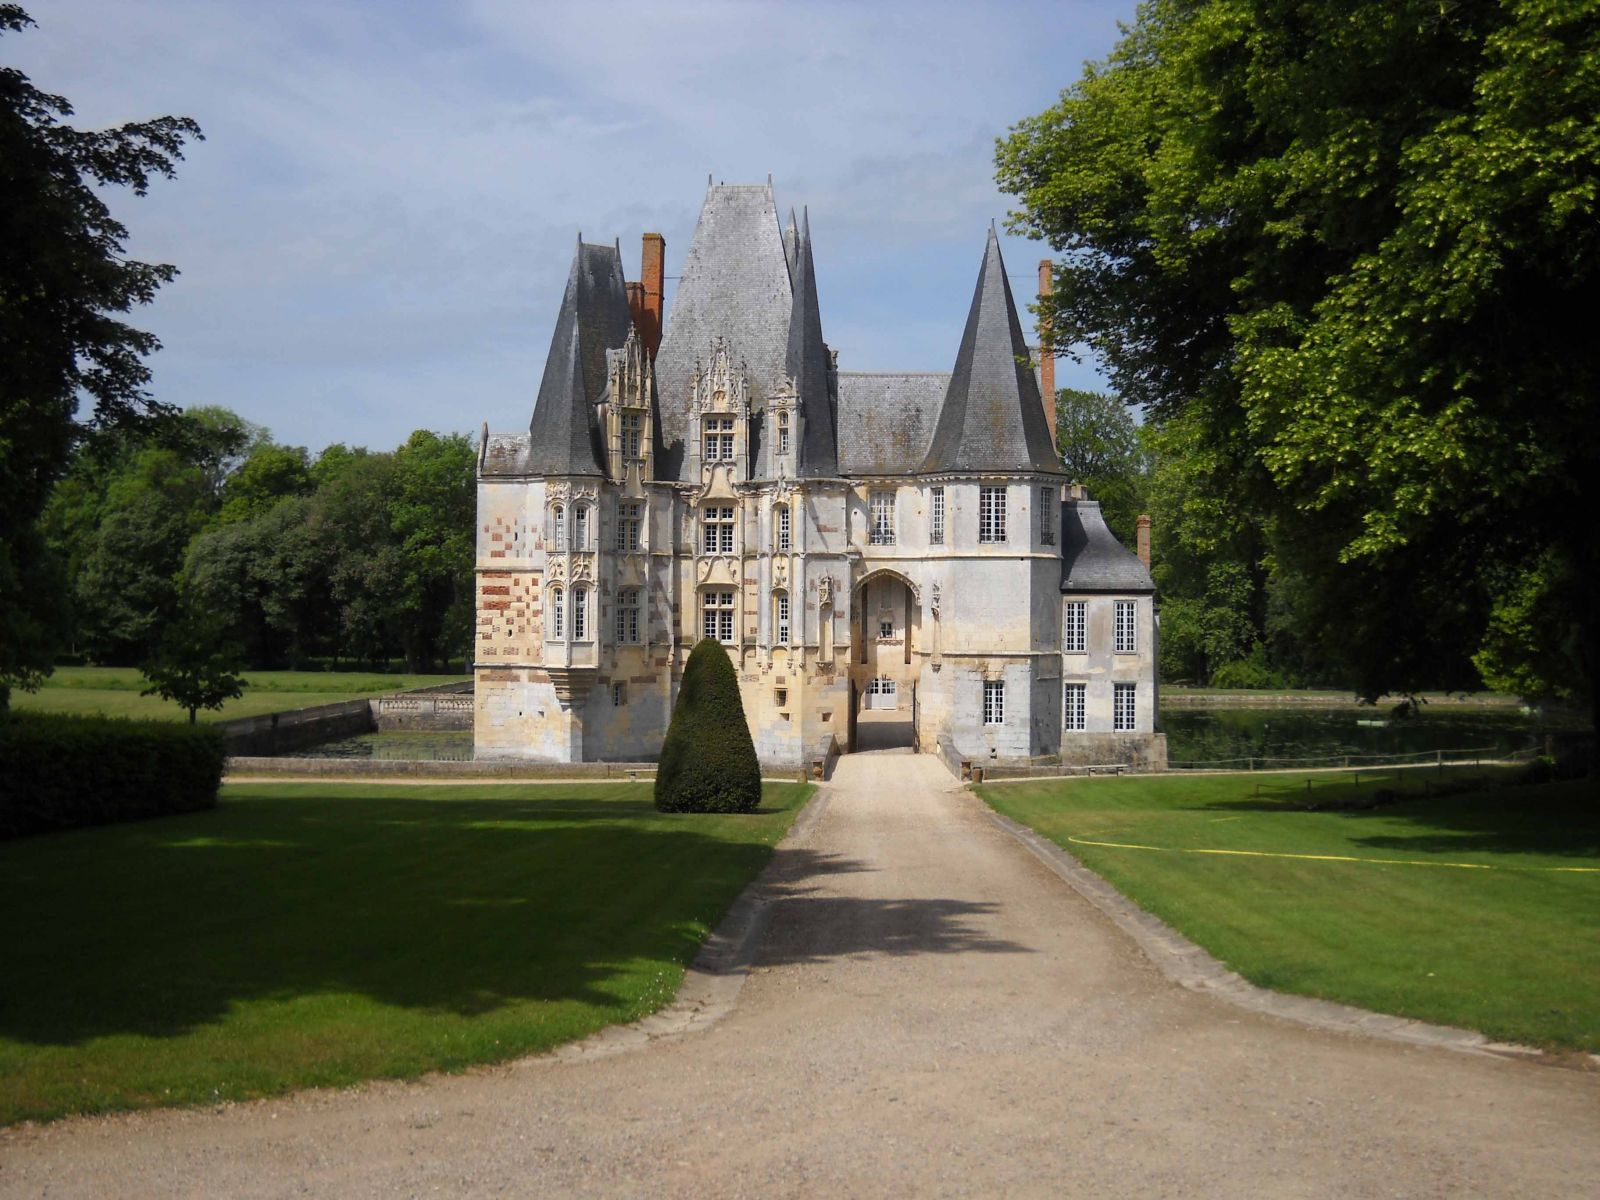 Pretty chateaux abound in Normandy